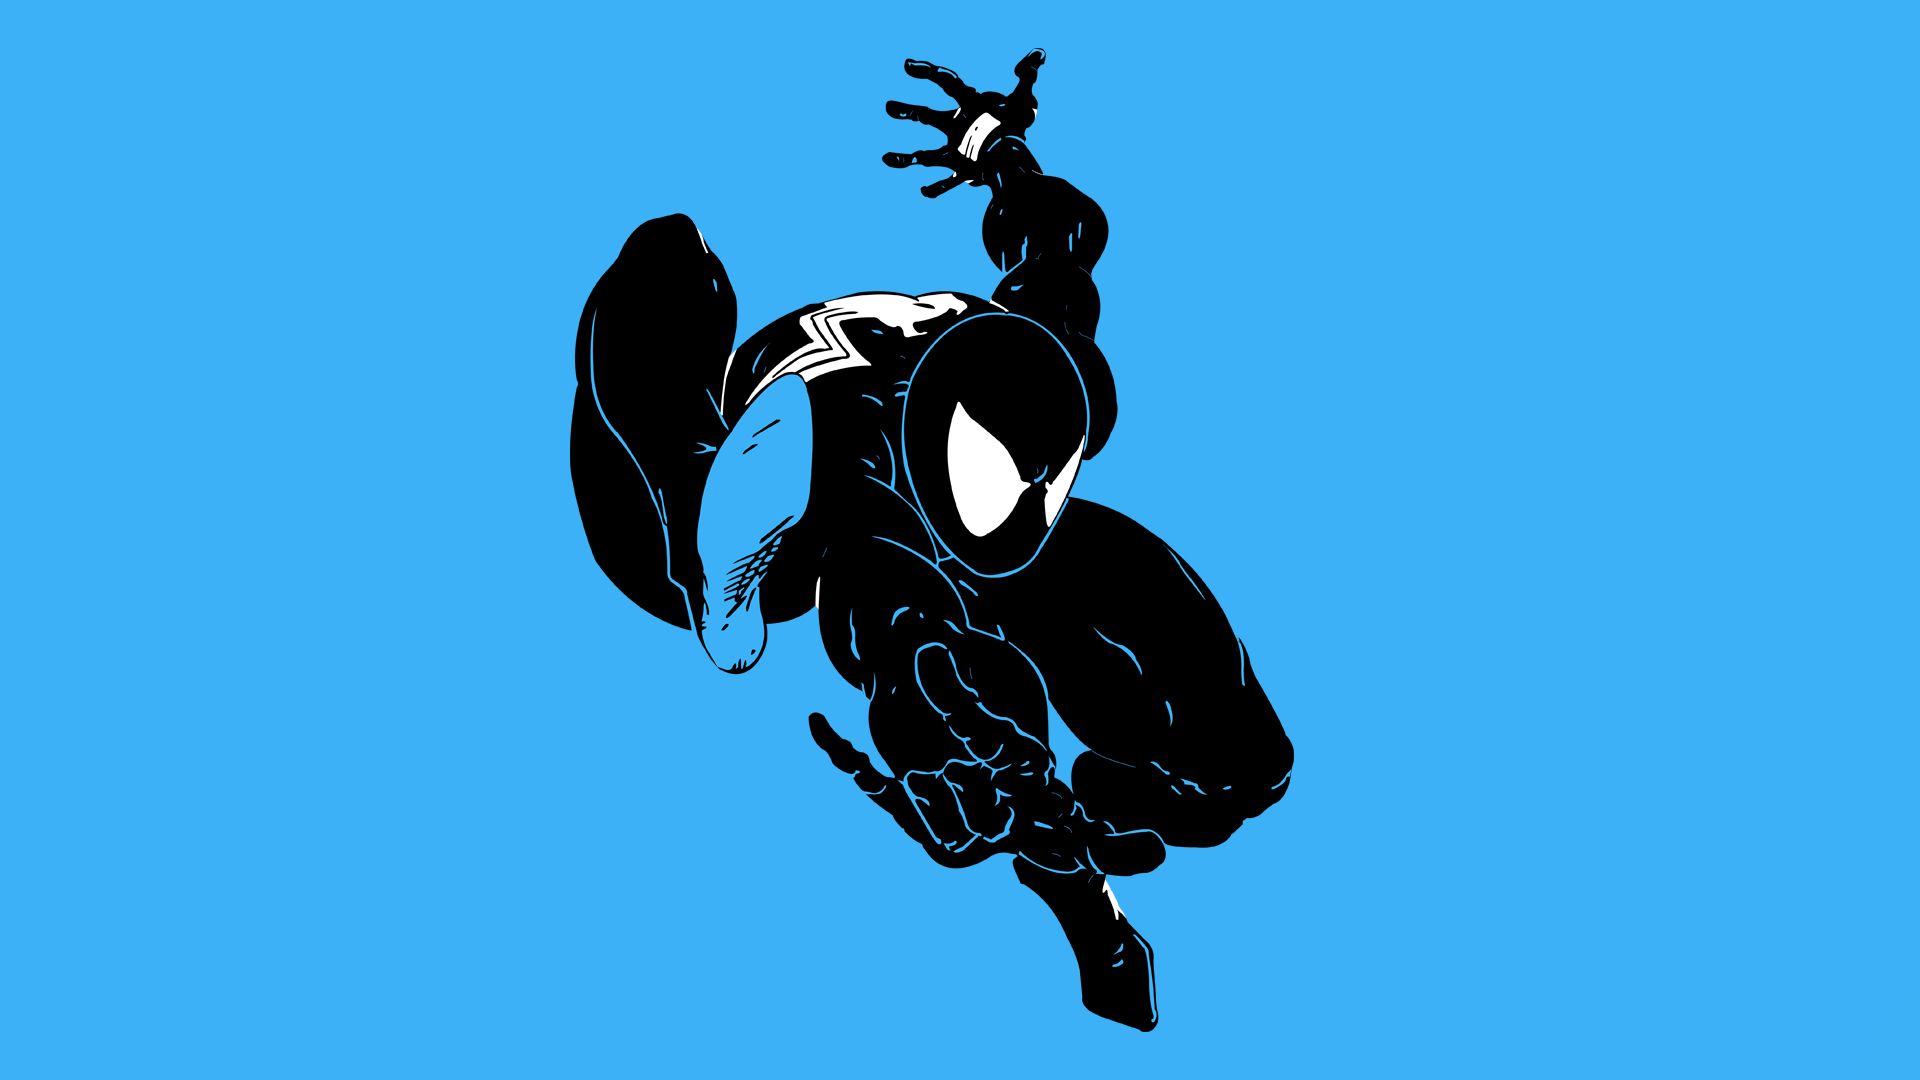 Best 63+ Symbiote Wallpapers on HipWallpapers.